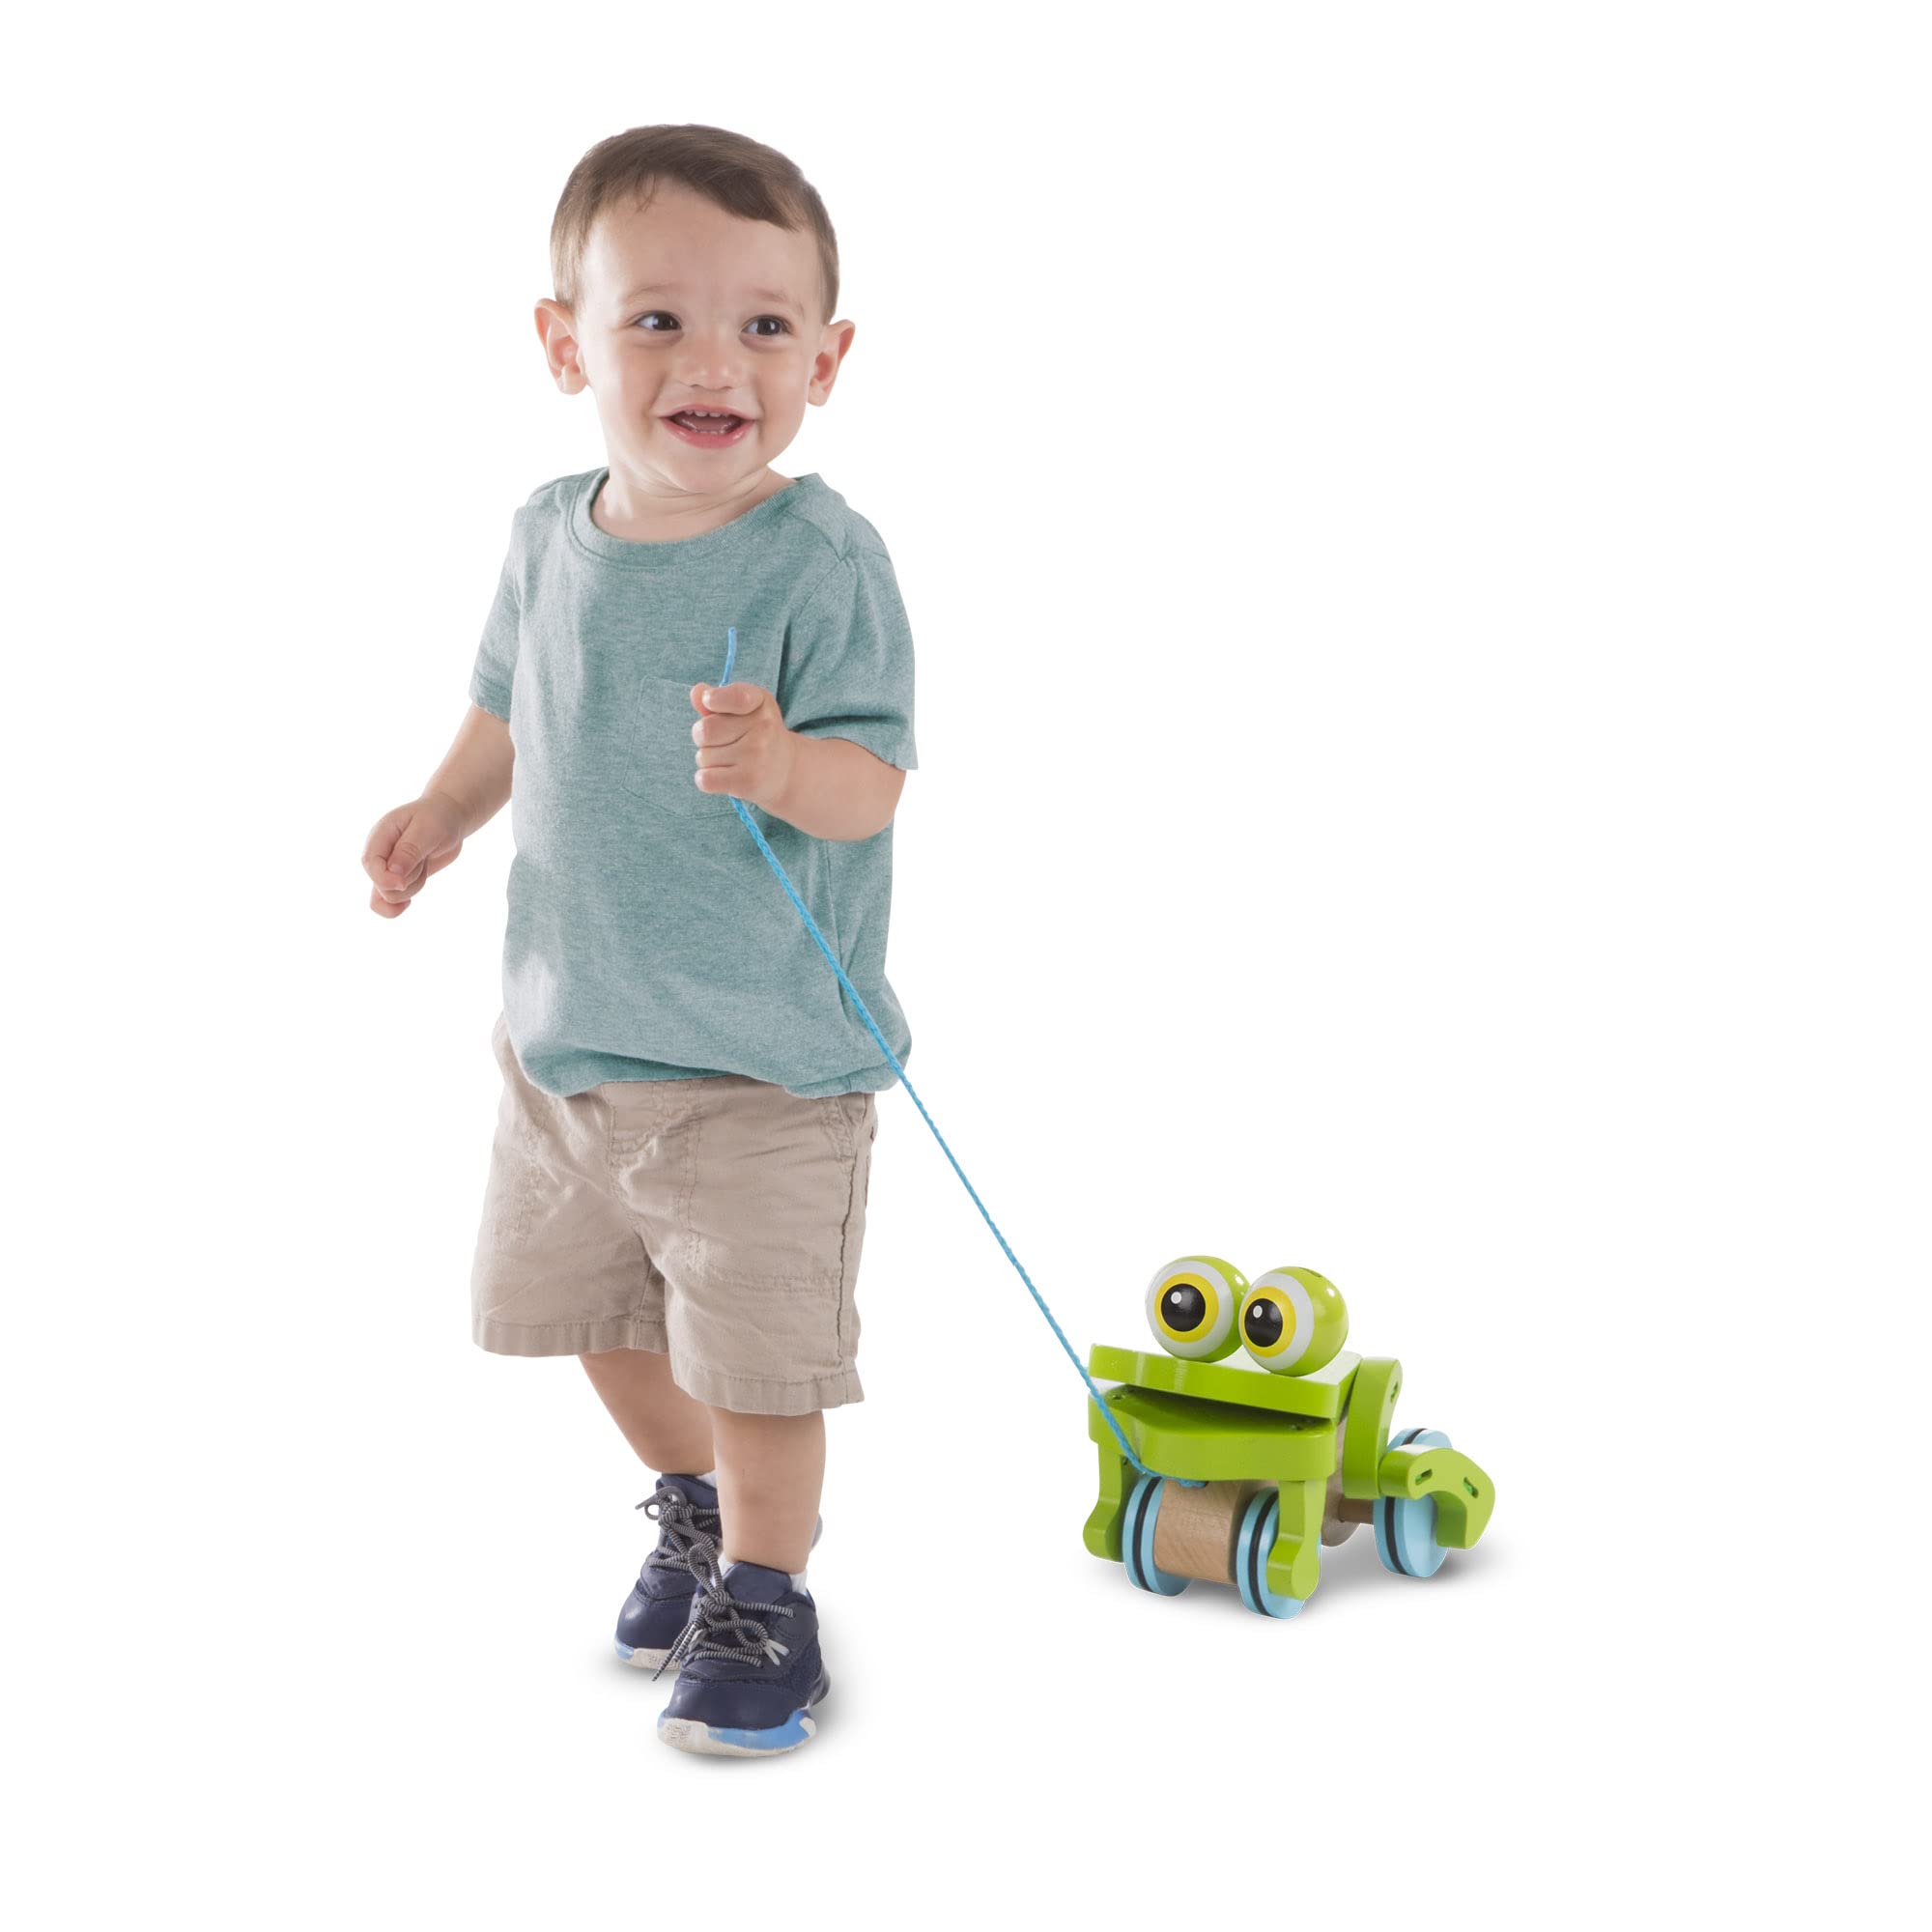 Melissa & Doug First Play Frolicking Frog Wooden Pull Toy - Developmental Duck Pull Toy For Toddlers Ages 1+